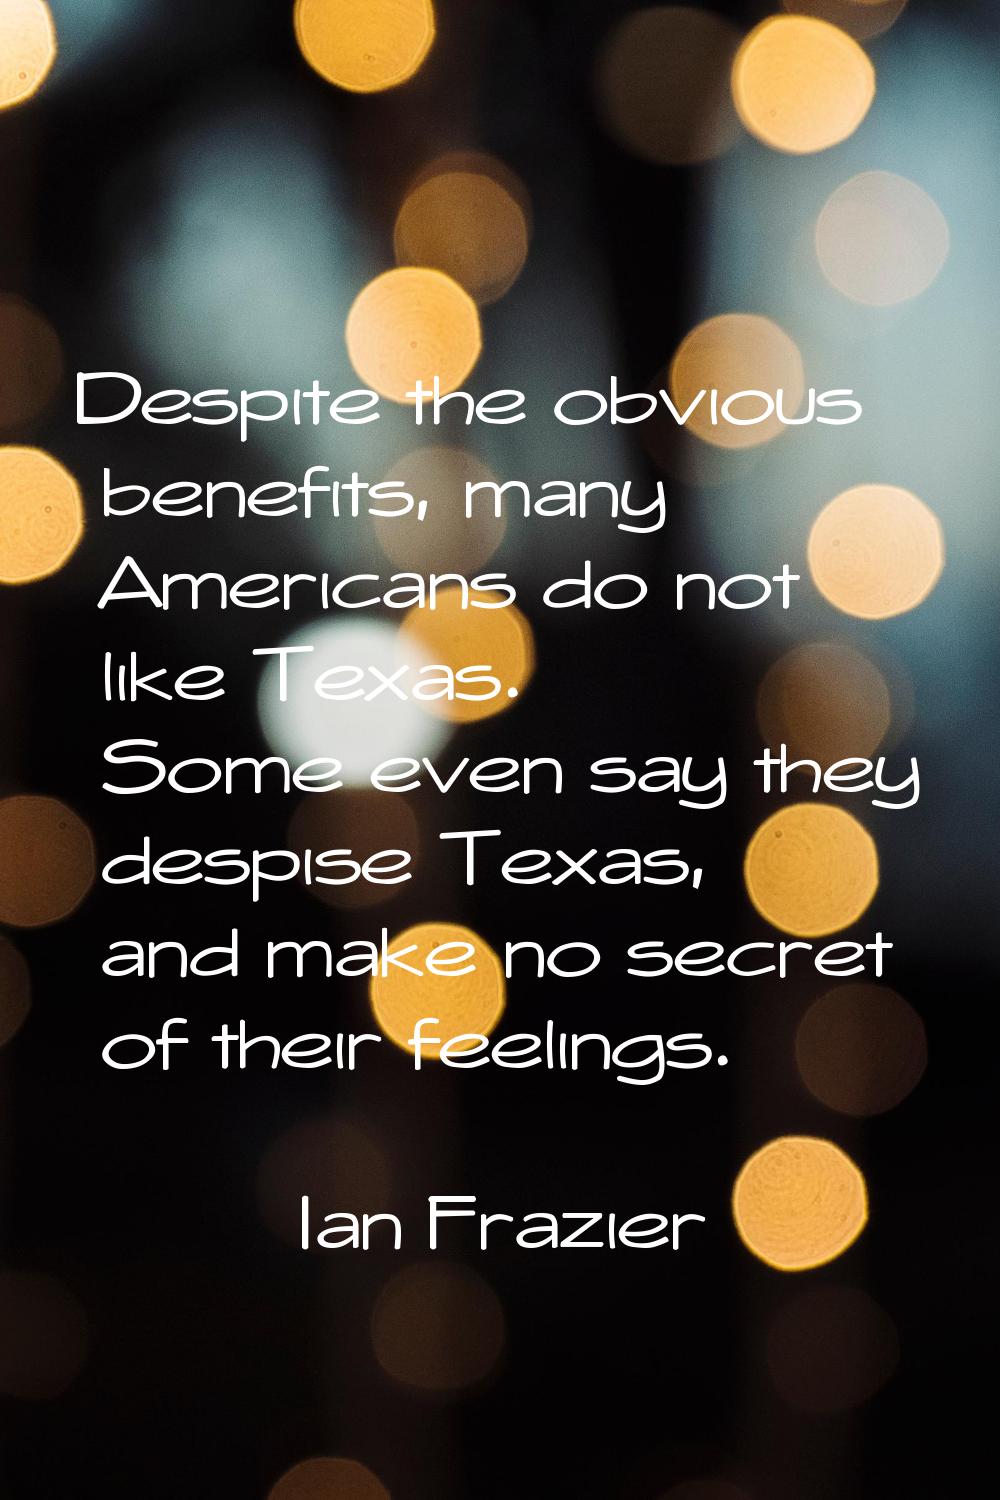 Despite the obvious benefits, many Americans do not like Texas. Some even say they despise Texas, a